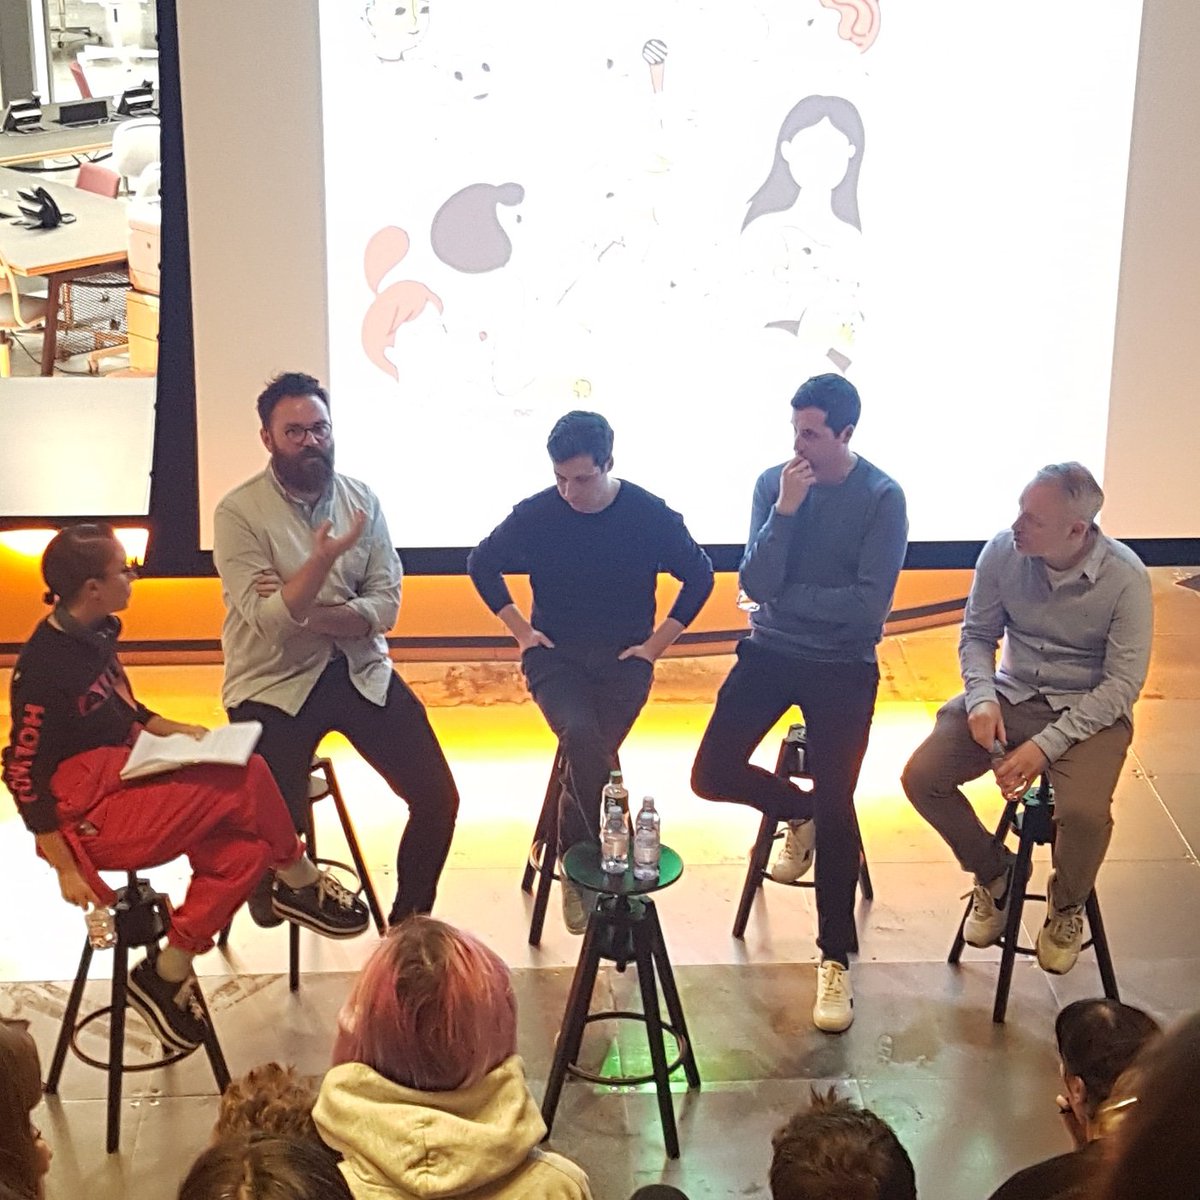 Here with @unawoods @Laughing_Lion @AGillustrates (back row, cushion!) At 'AOI discusses creating your own success'. The Project Twins @the_project_twins , Steve McCarthy @mrstevemccarthy and Peter from @wearerothco in conversation with @loubones from @theaoi.